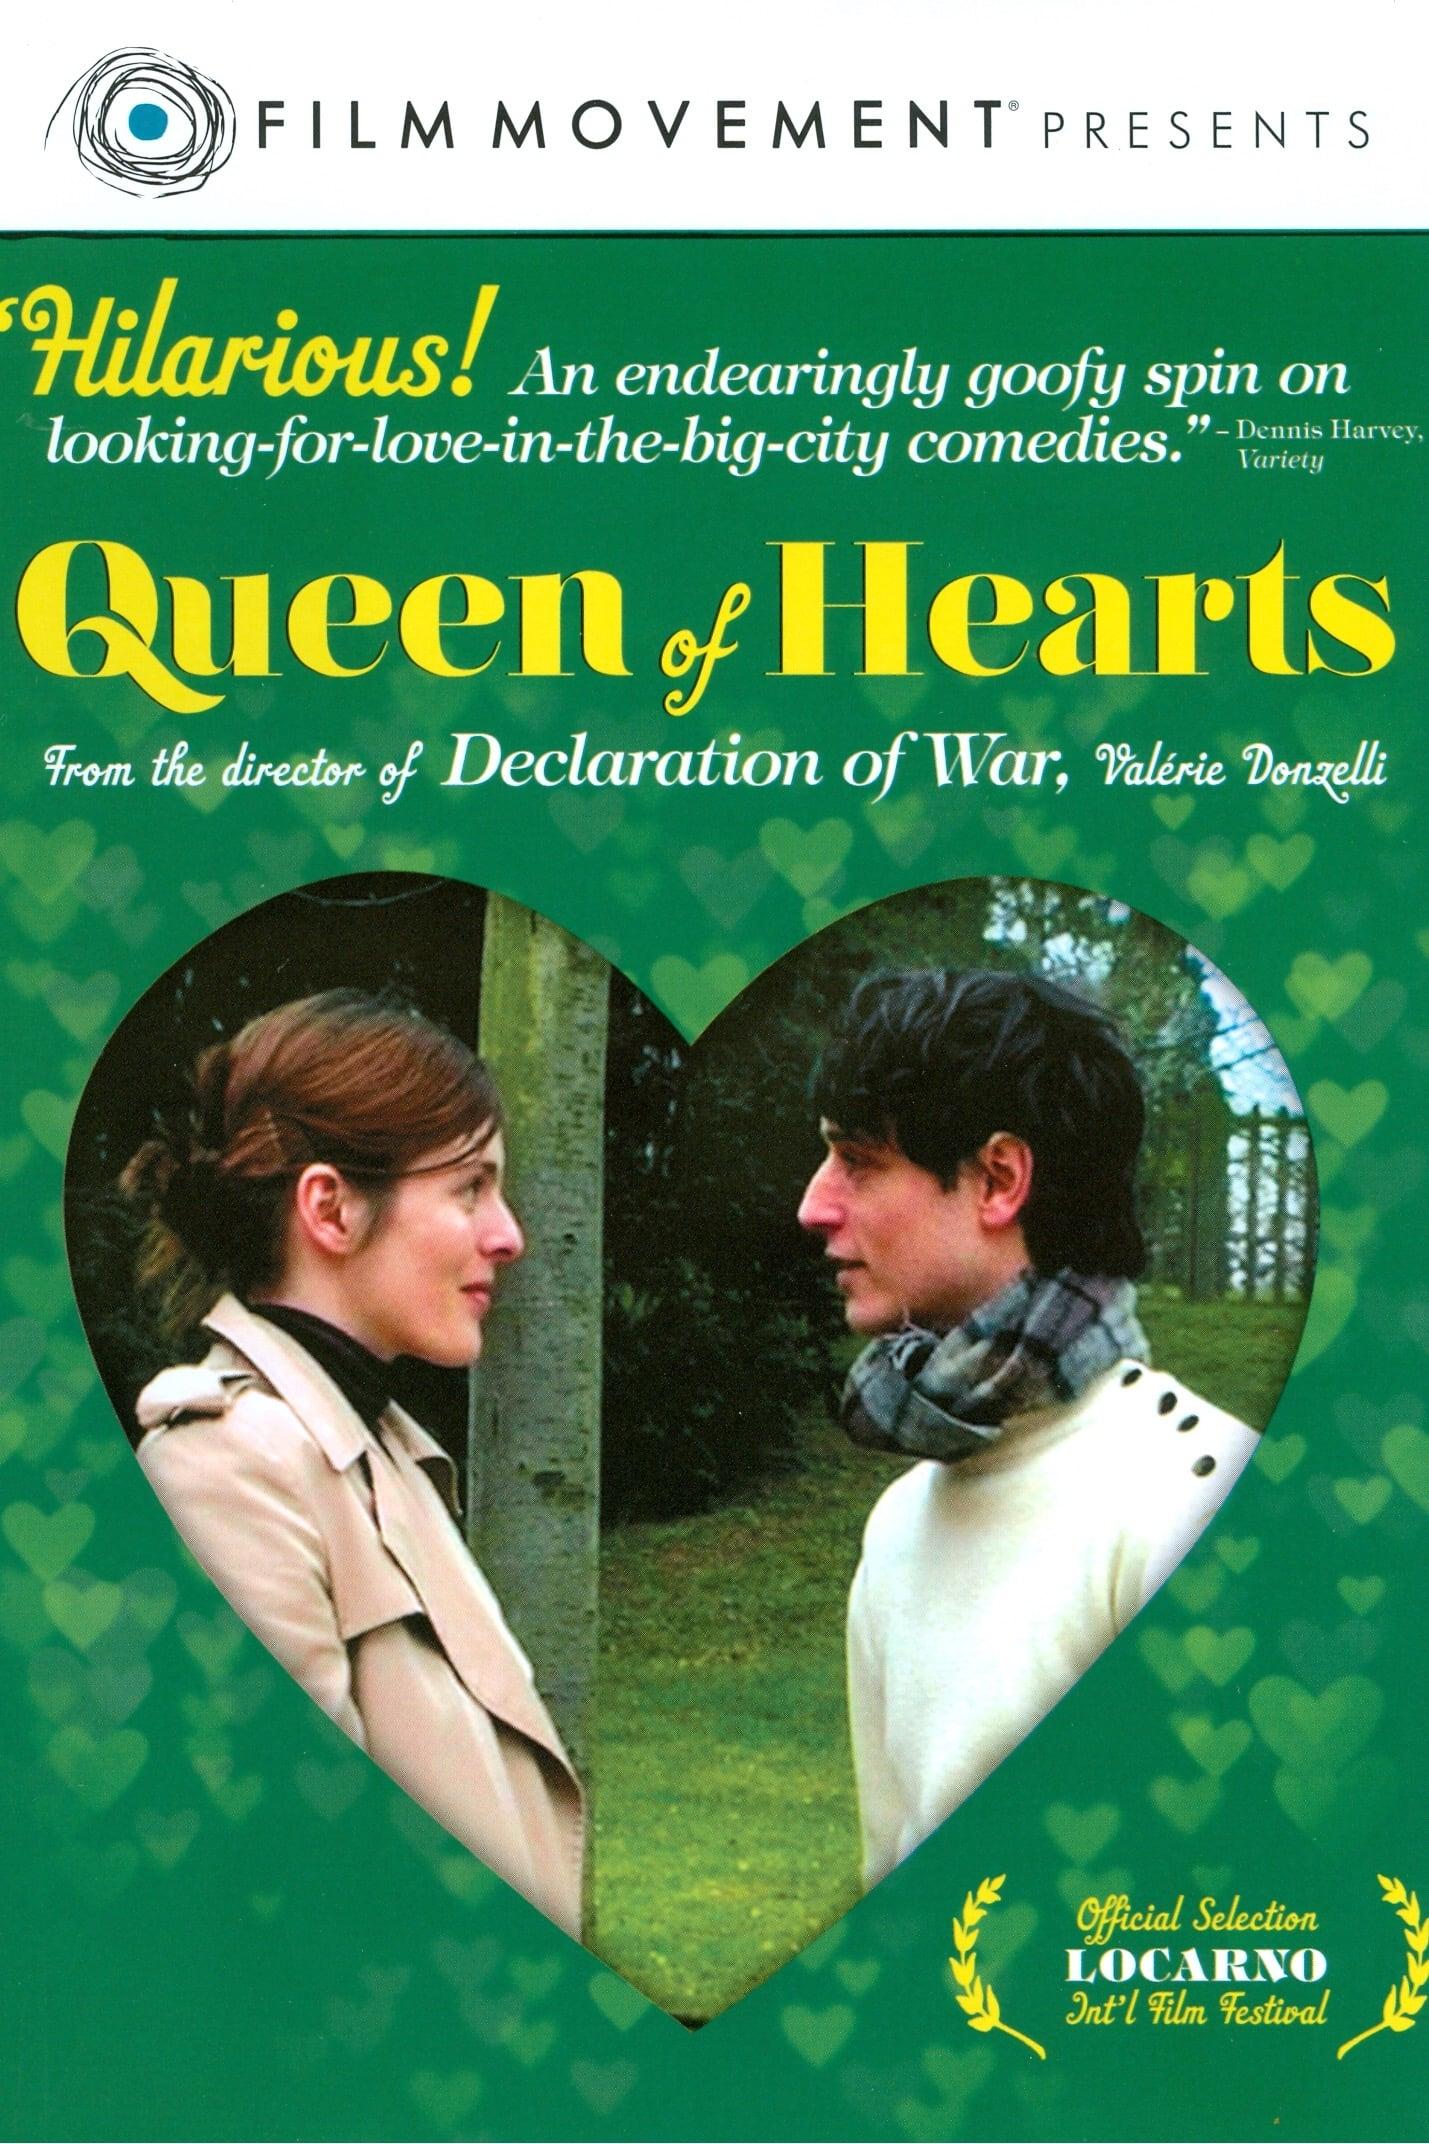 The Queen of Hearts poster